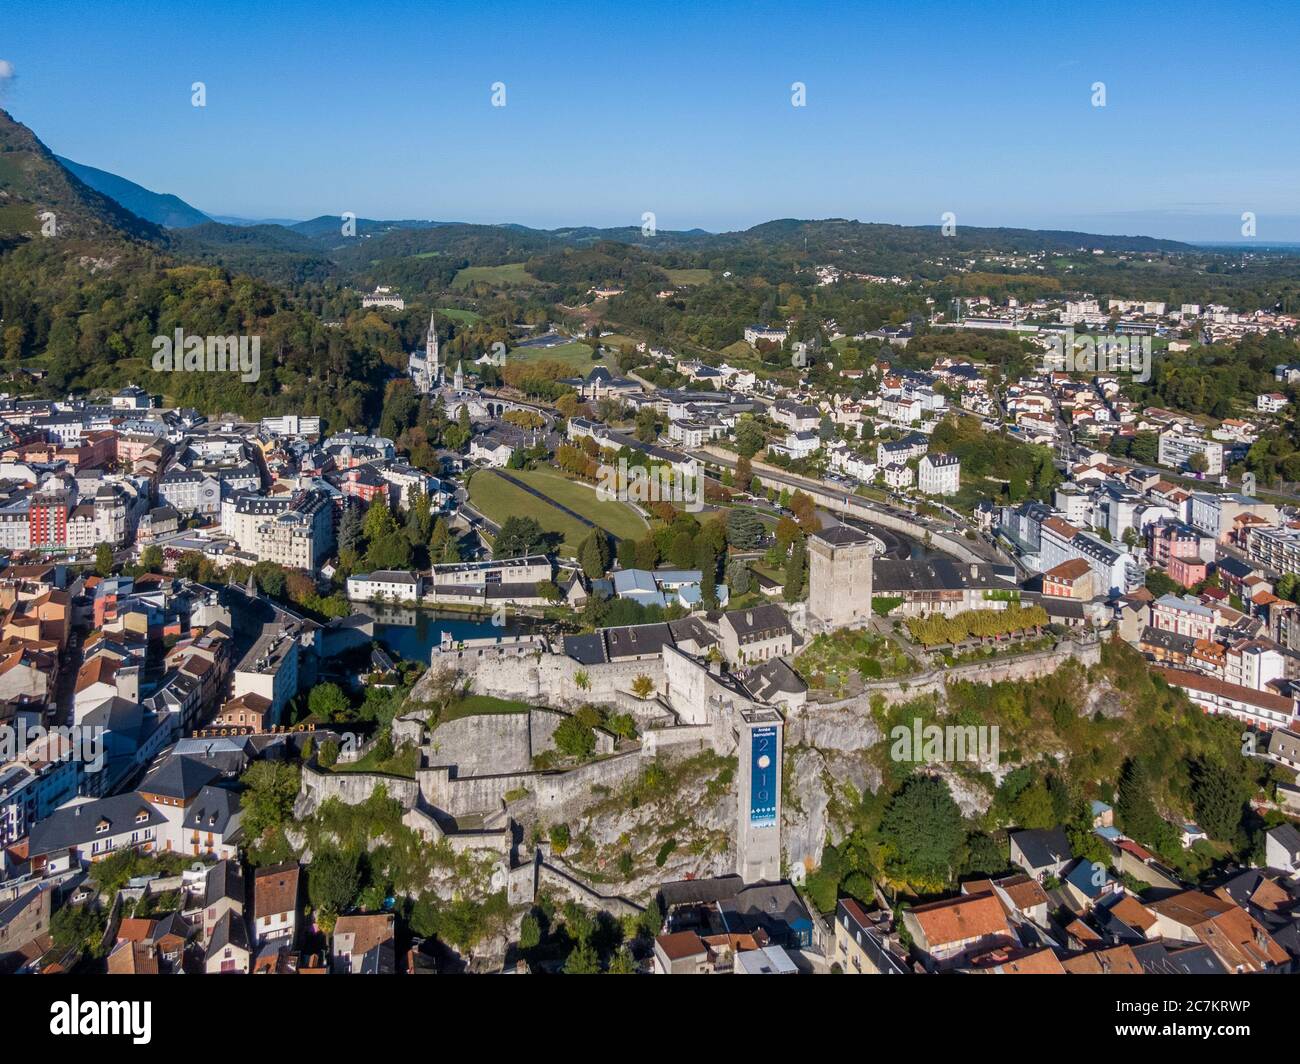 Aerial view of Sanctuary of Our Lady of Lourdes and Chateau fort de Lourdes, France Stock Photo